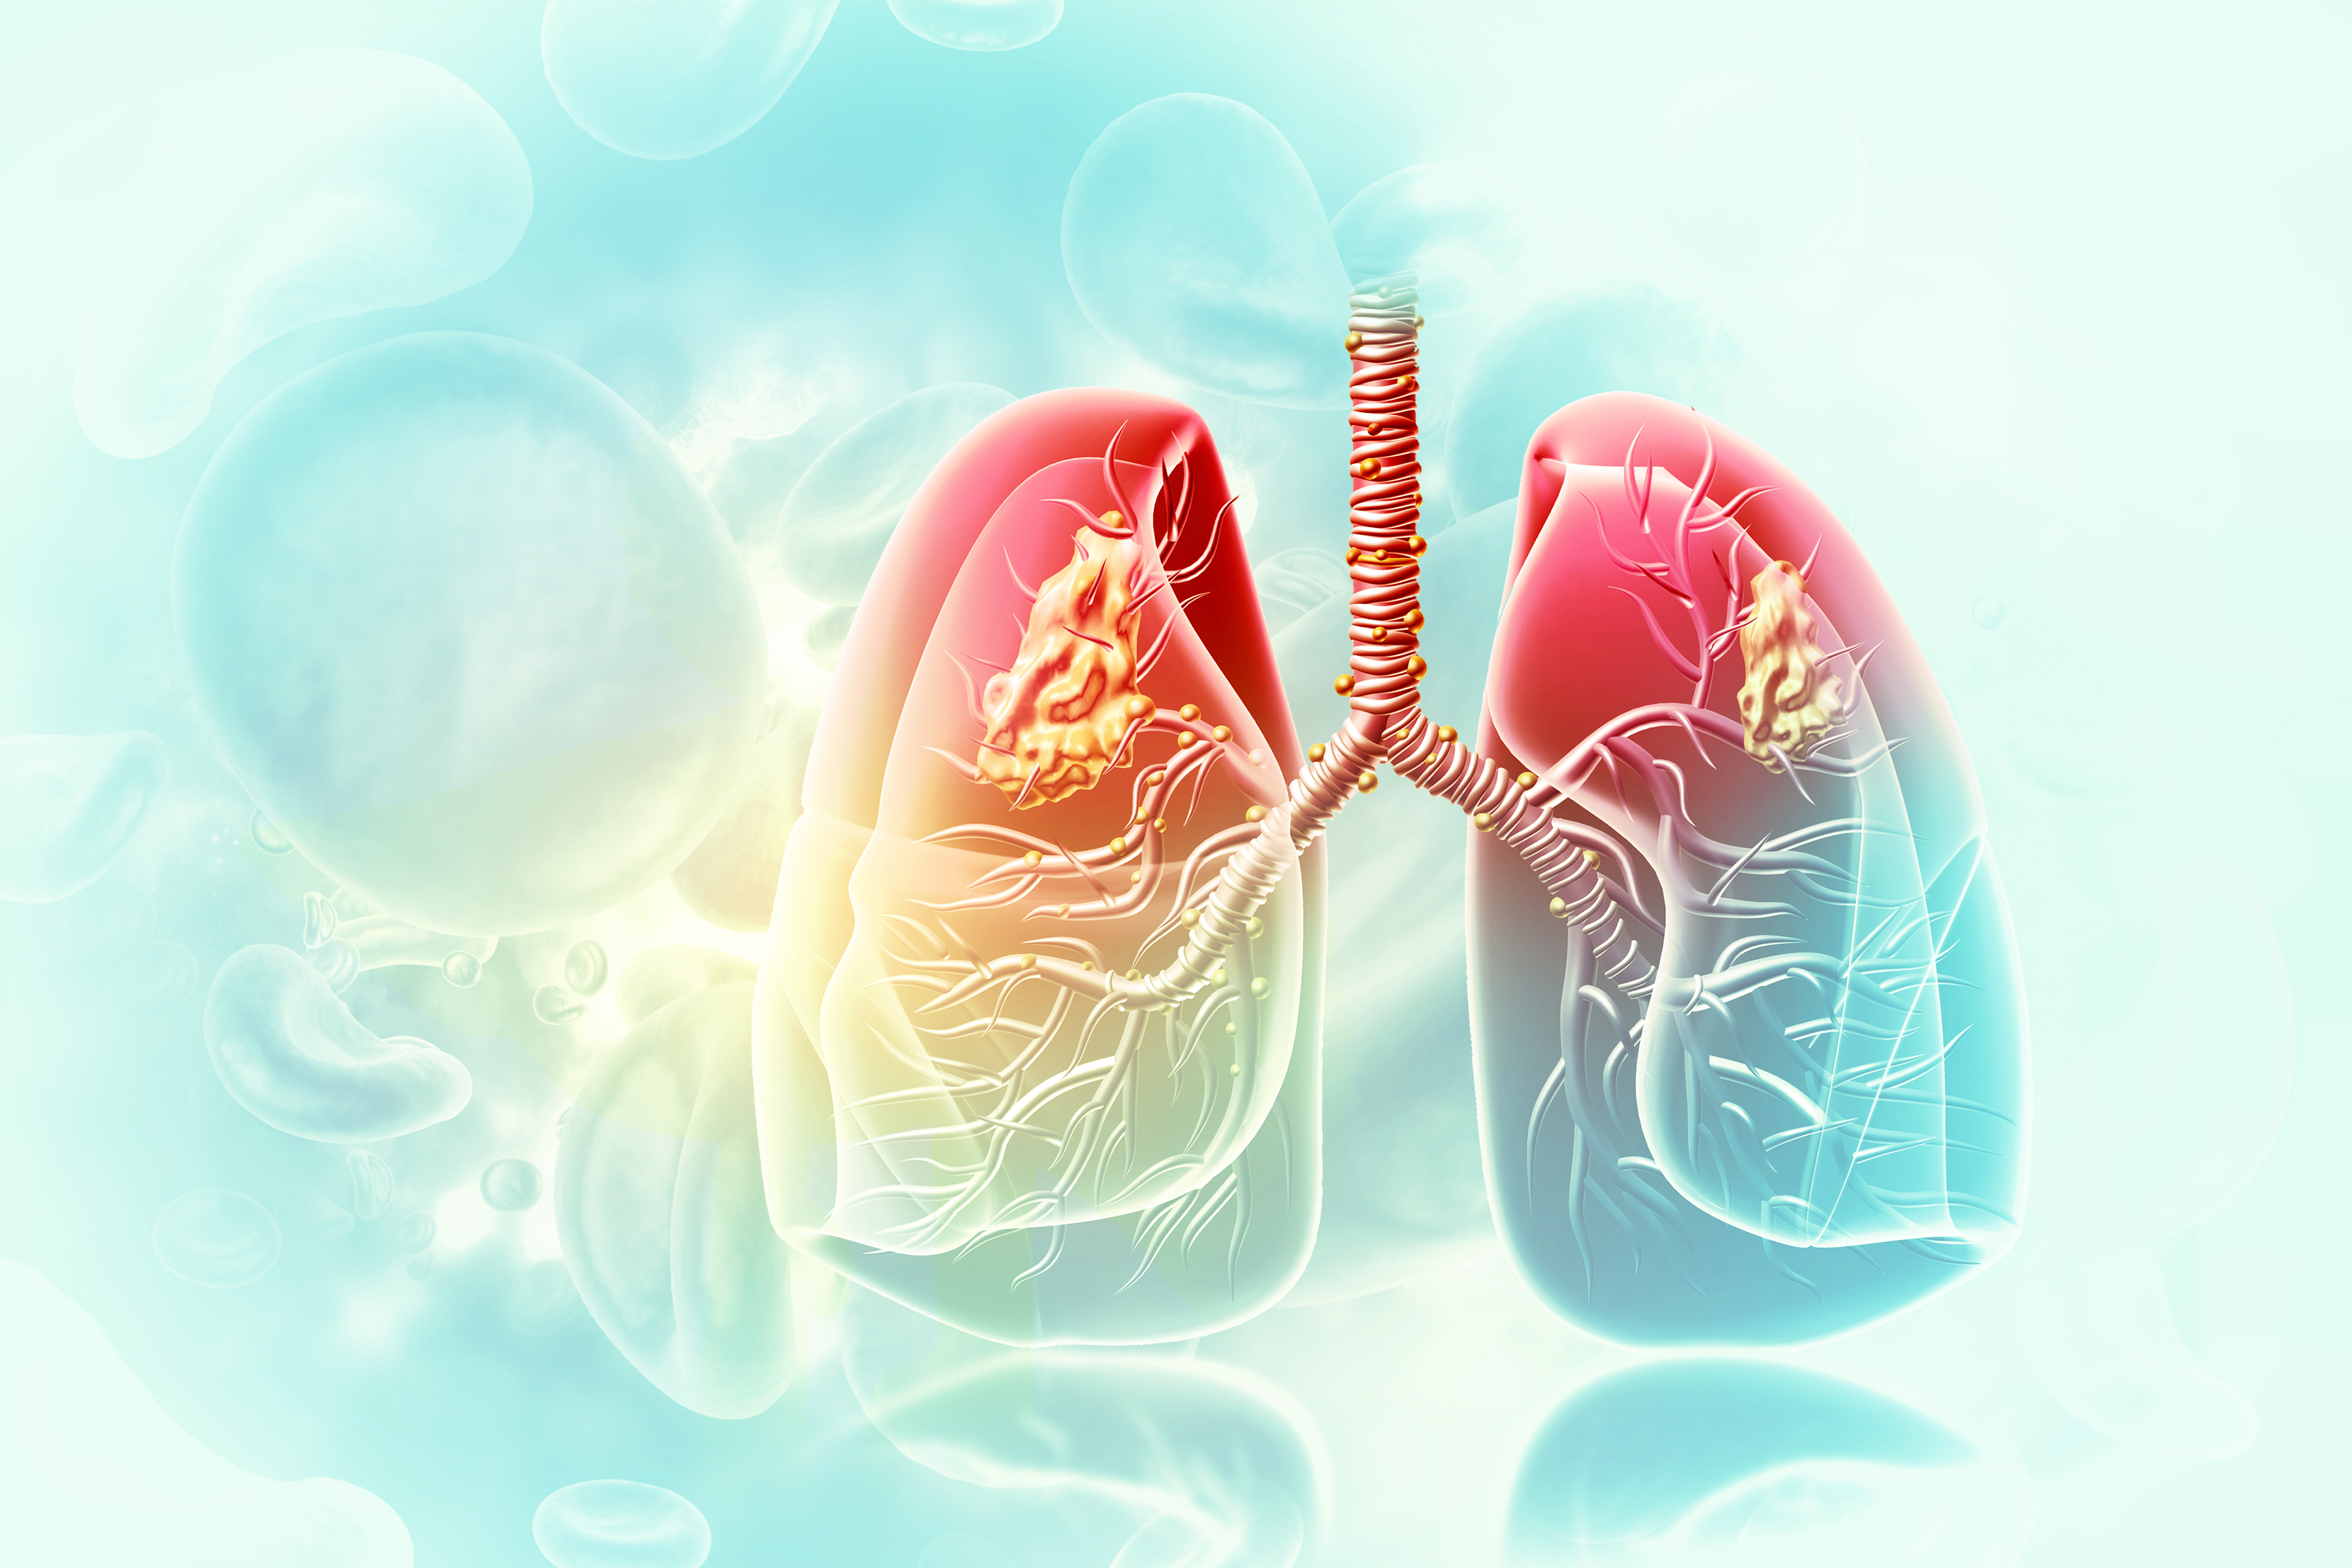 Symptoms and Warning Signs of Lung Cancer as Perceived by Primary Healthcare Providers